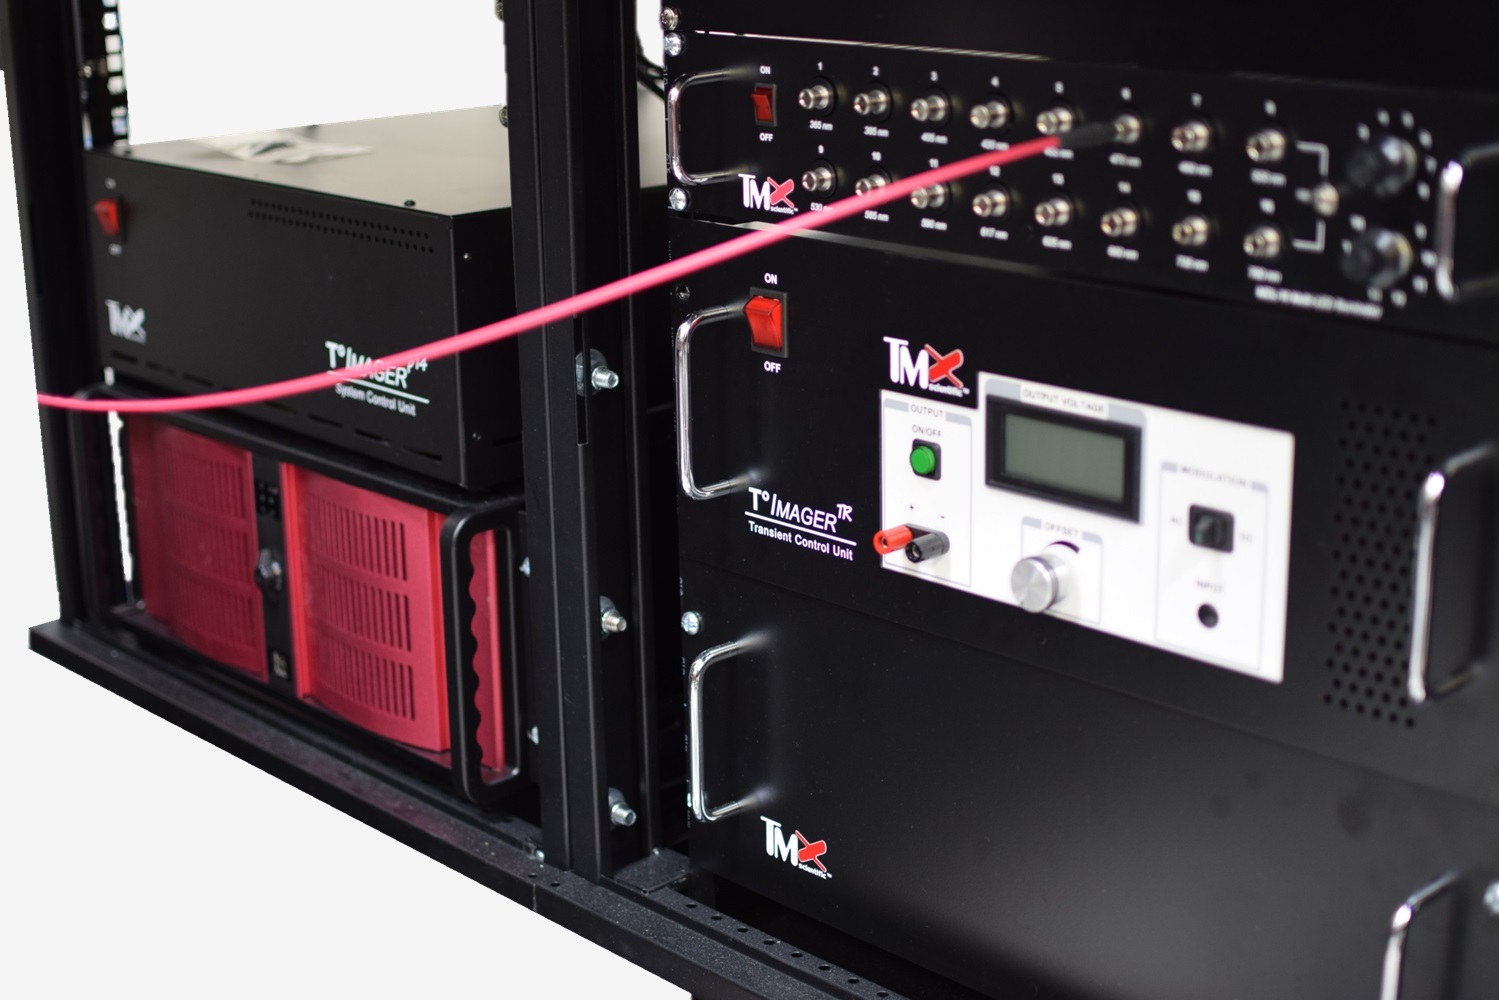  T°Imager Modular Design Contains All Units Within the System Rack Station 